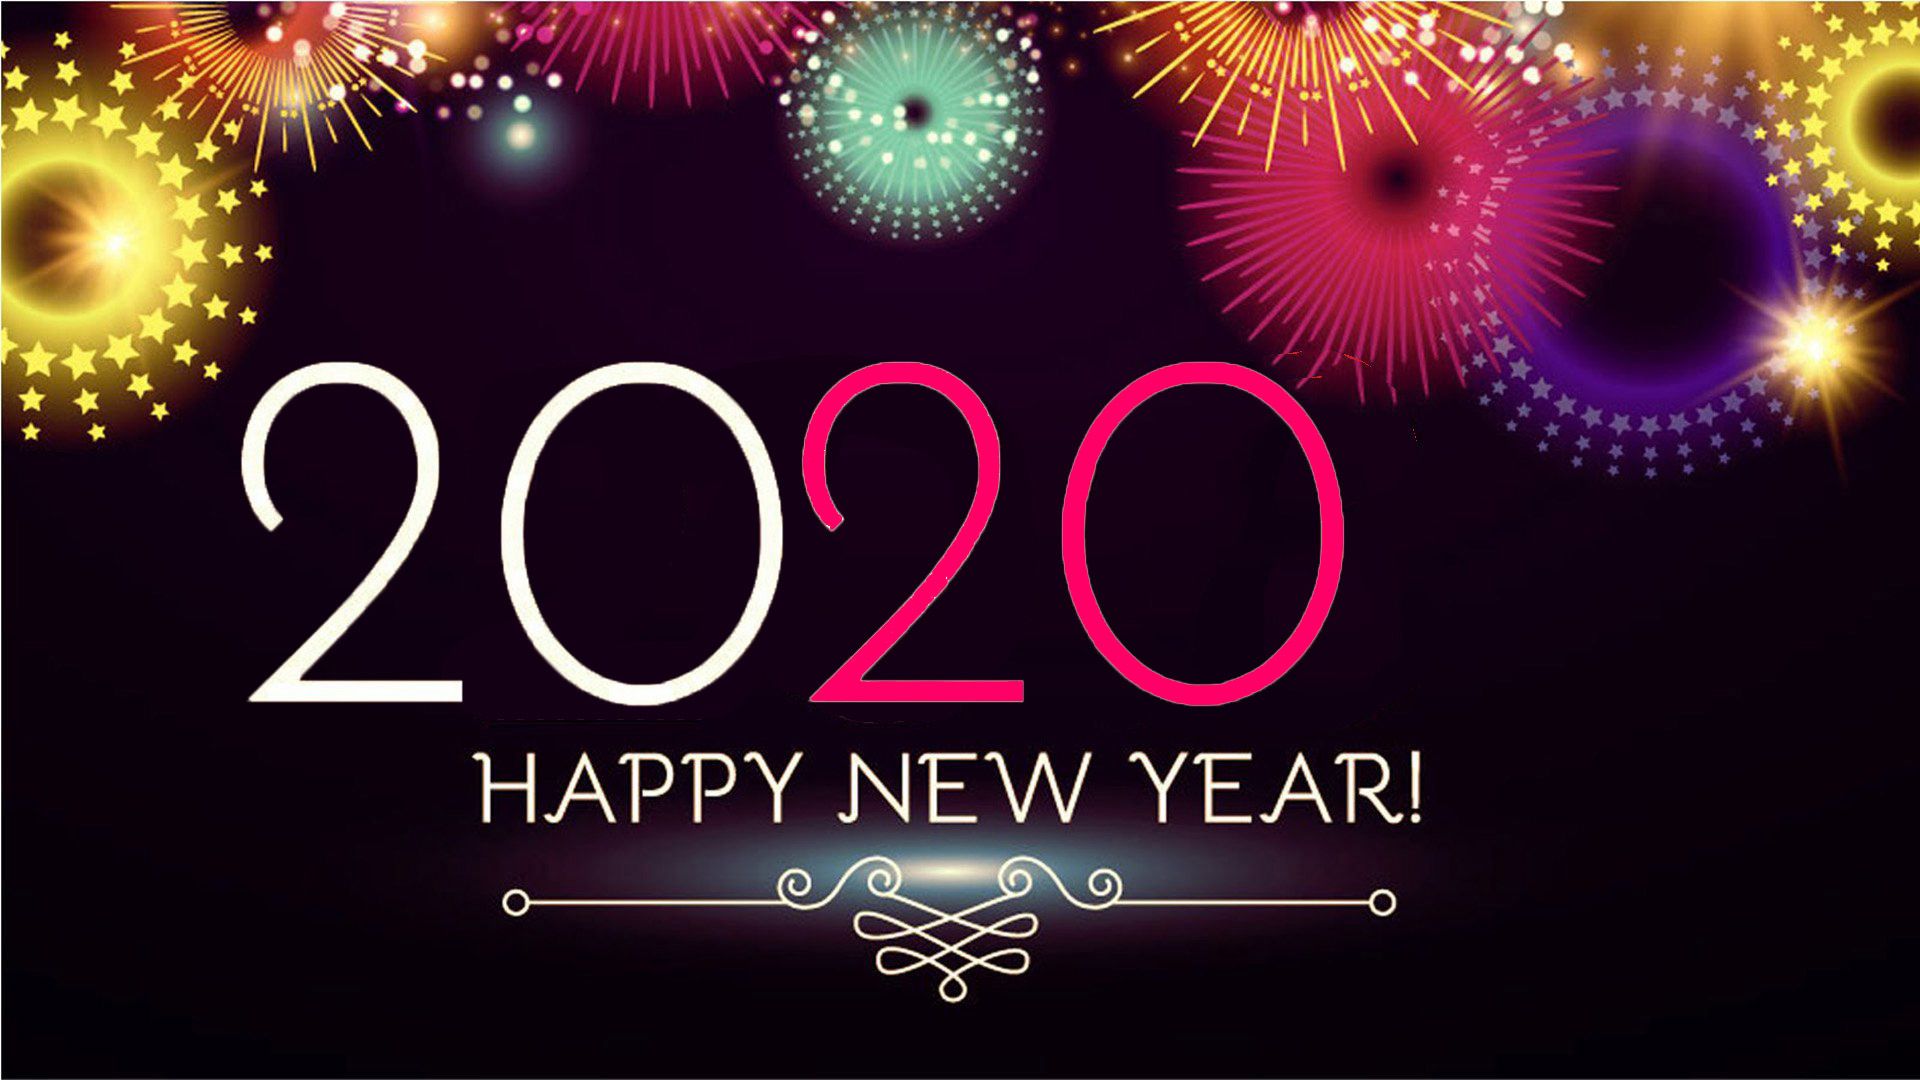 Full Hd Background Wallpaper 2020 New Year Background - click click